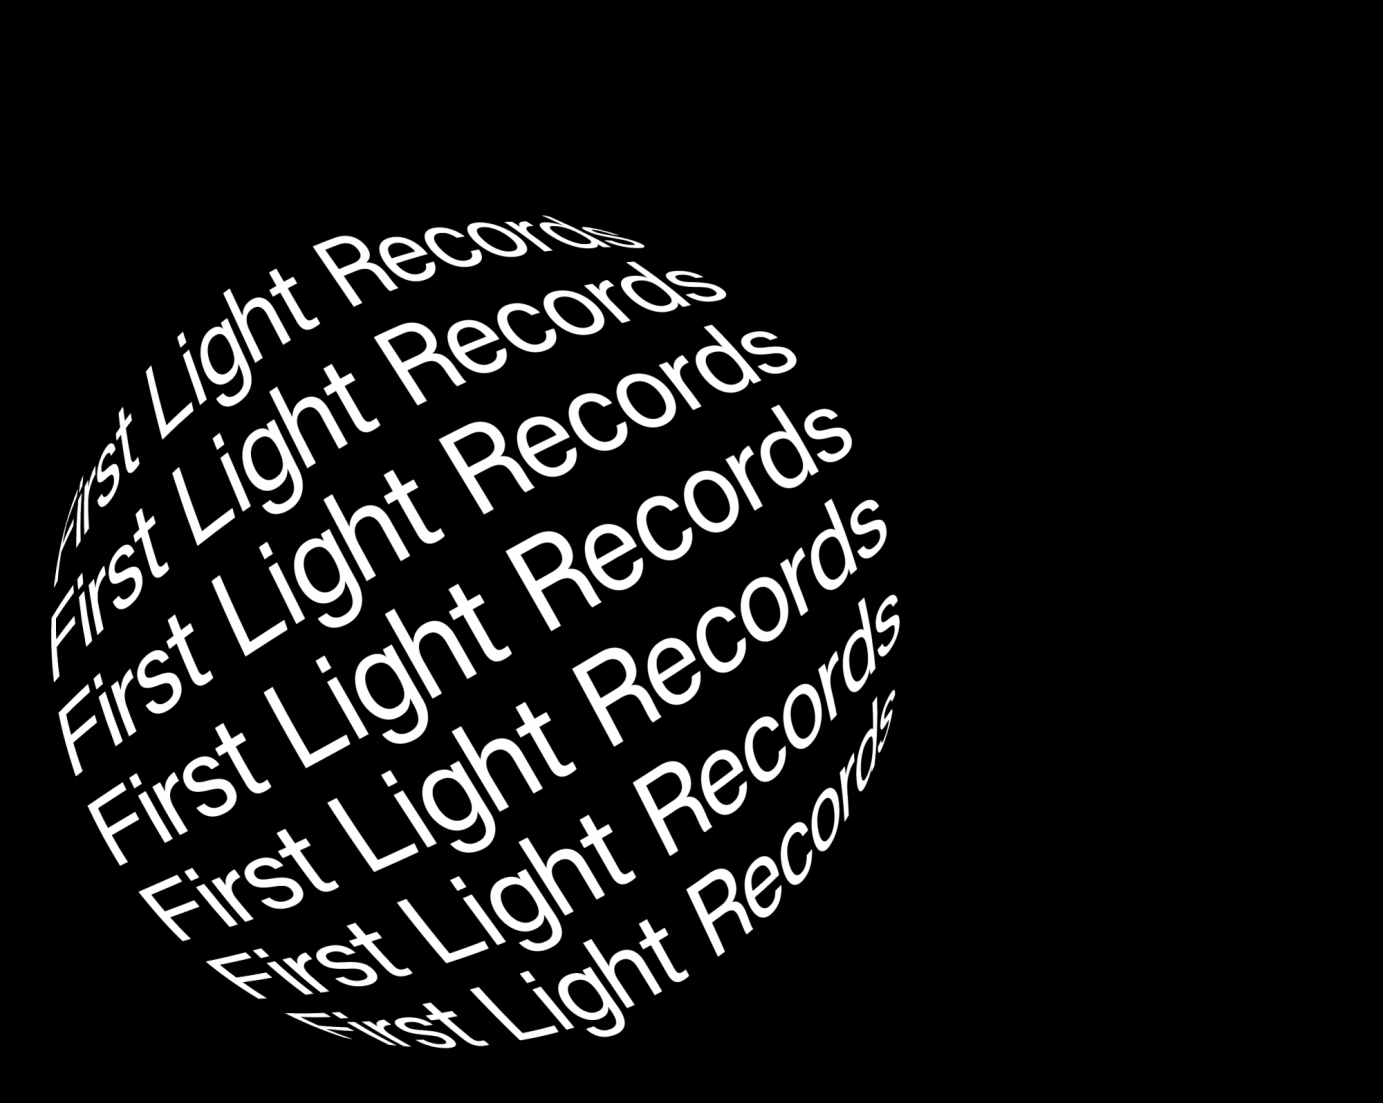 Branding & Creative Direction for First Light Records